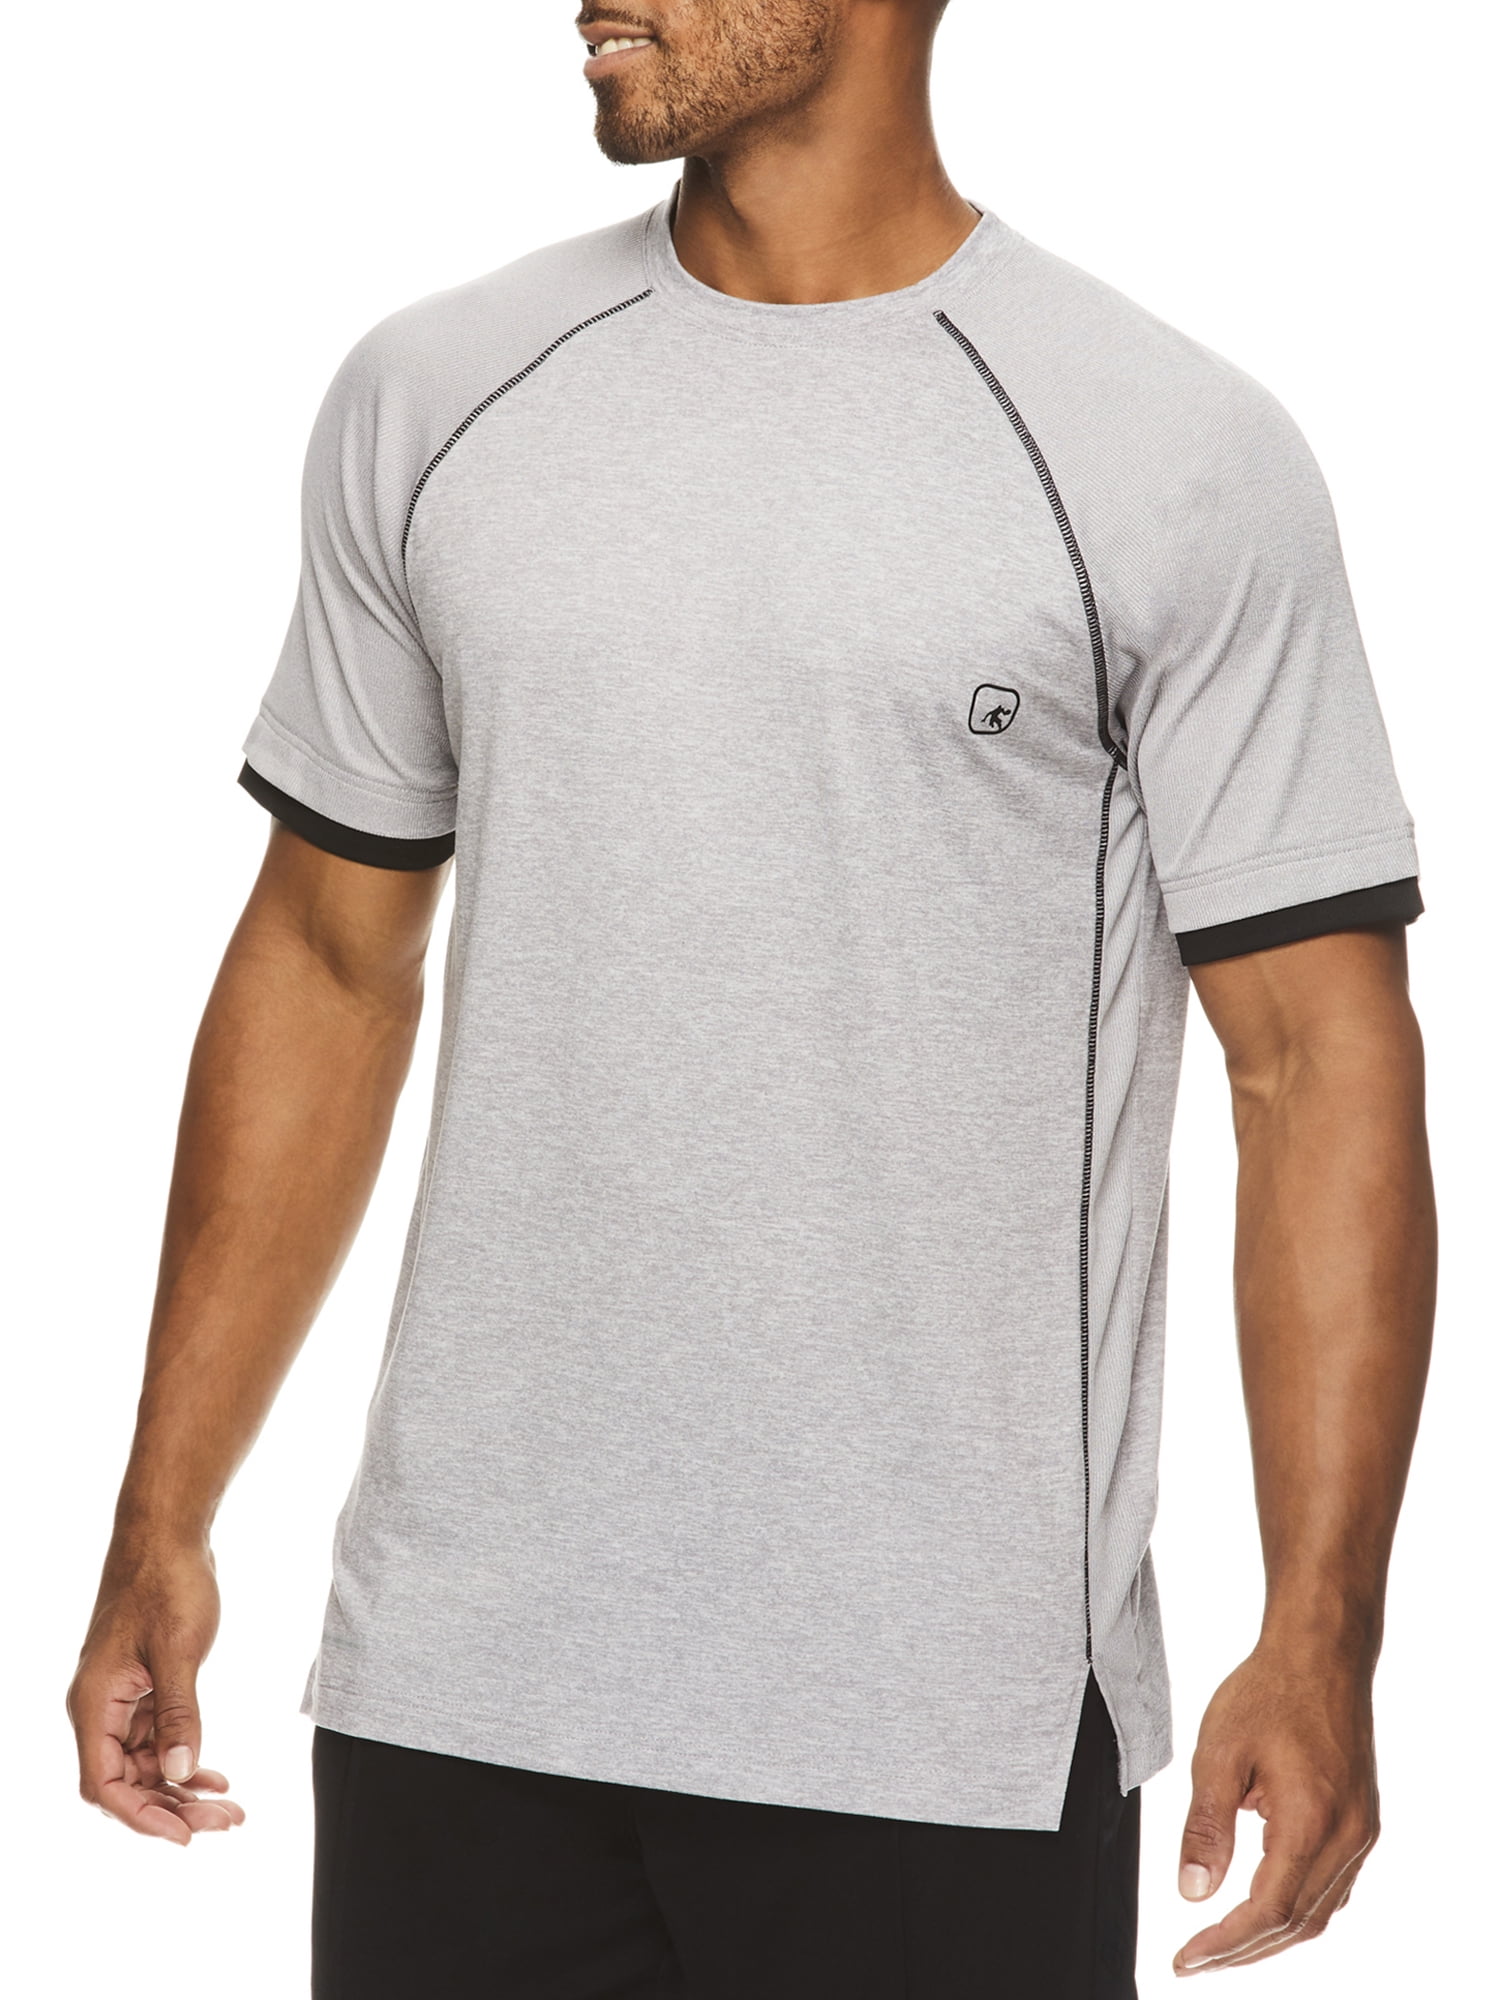 AND1 Mens Performance Basketball Tee, up to Size 5XL - Walmart.com